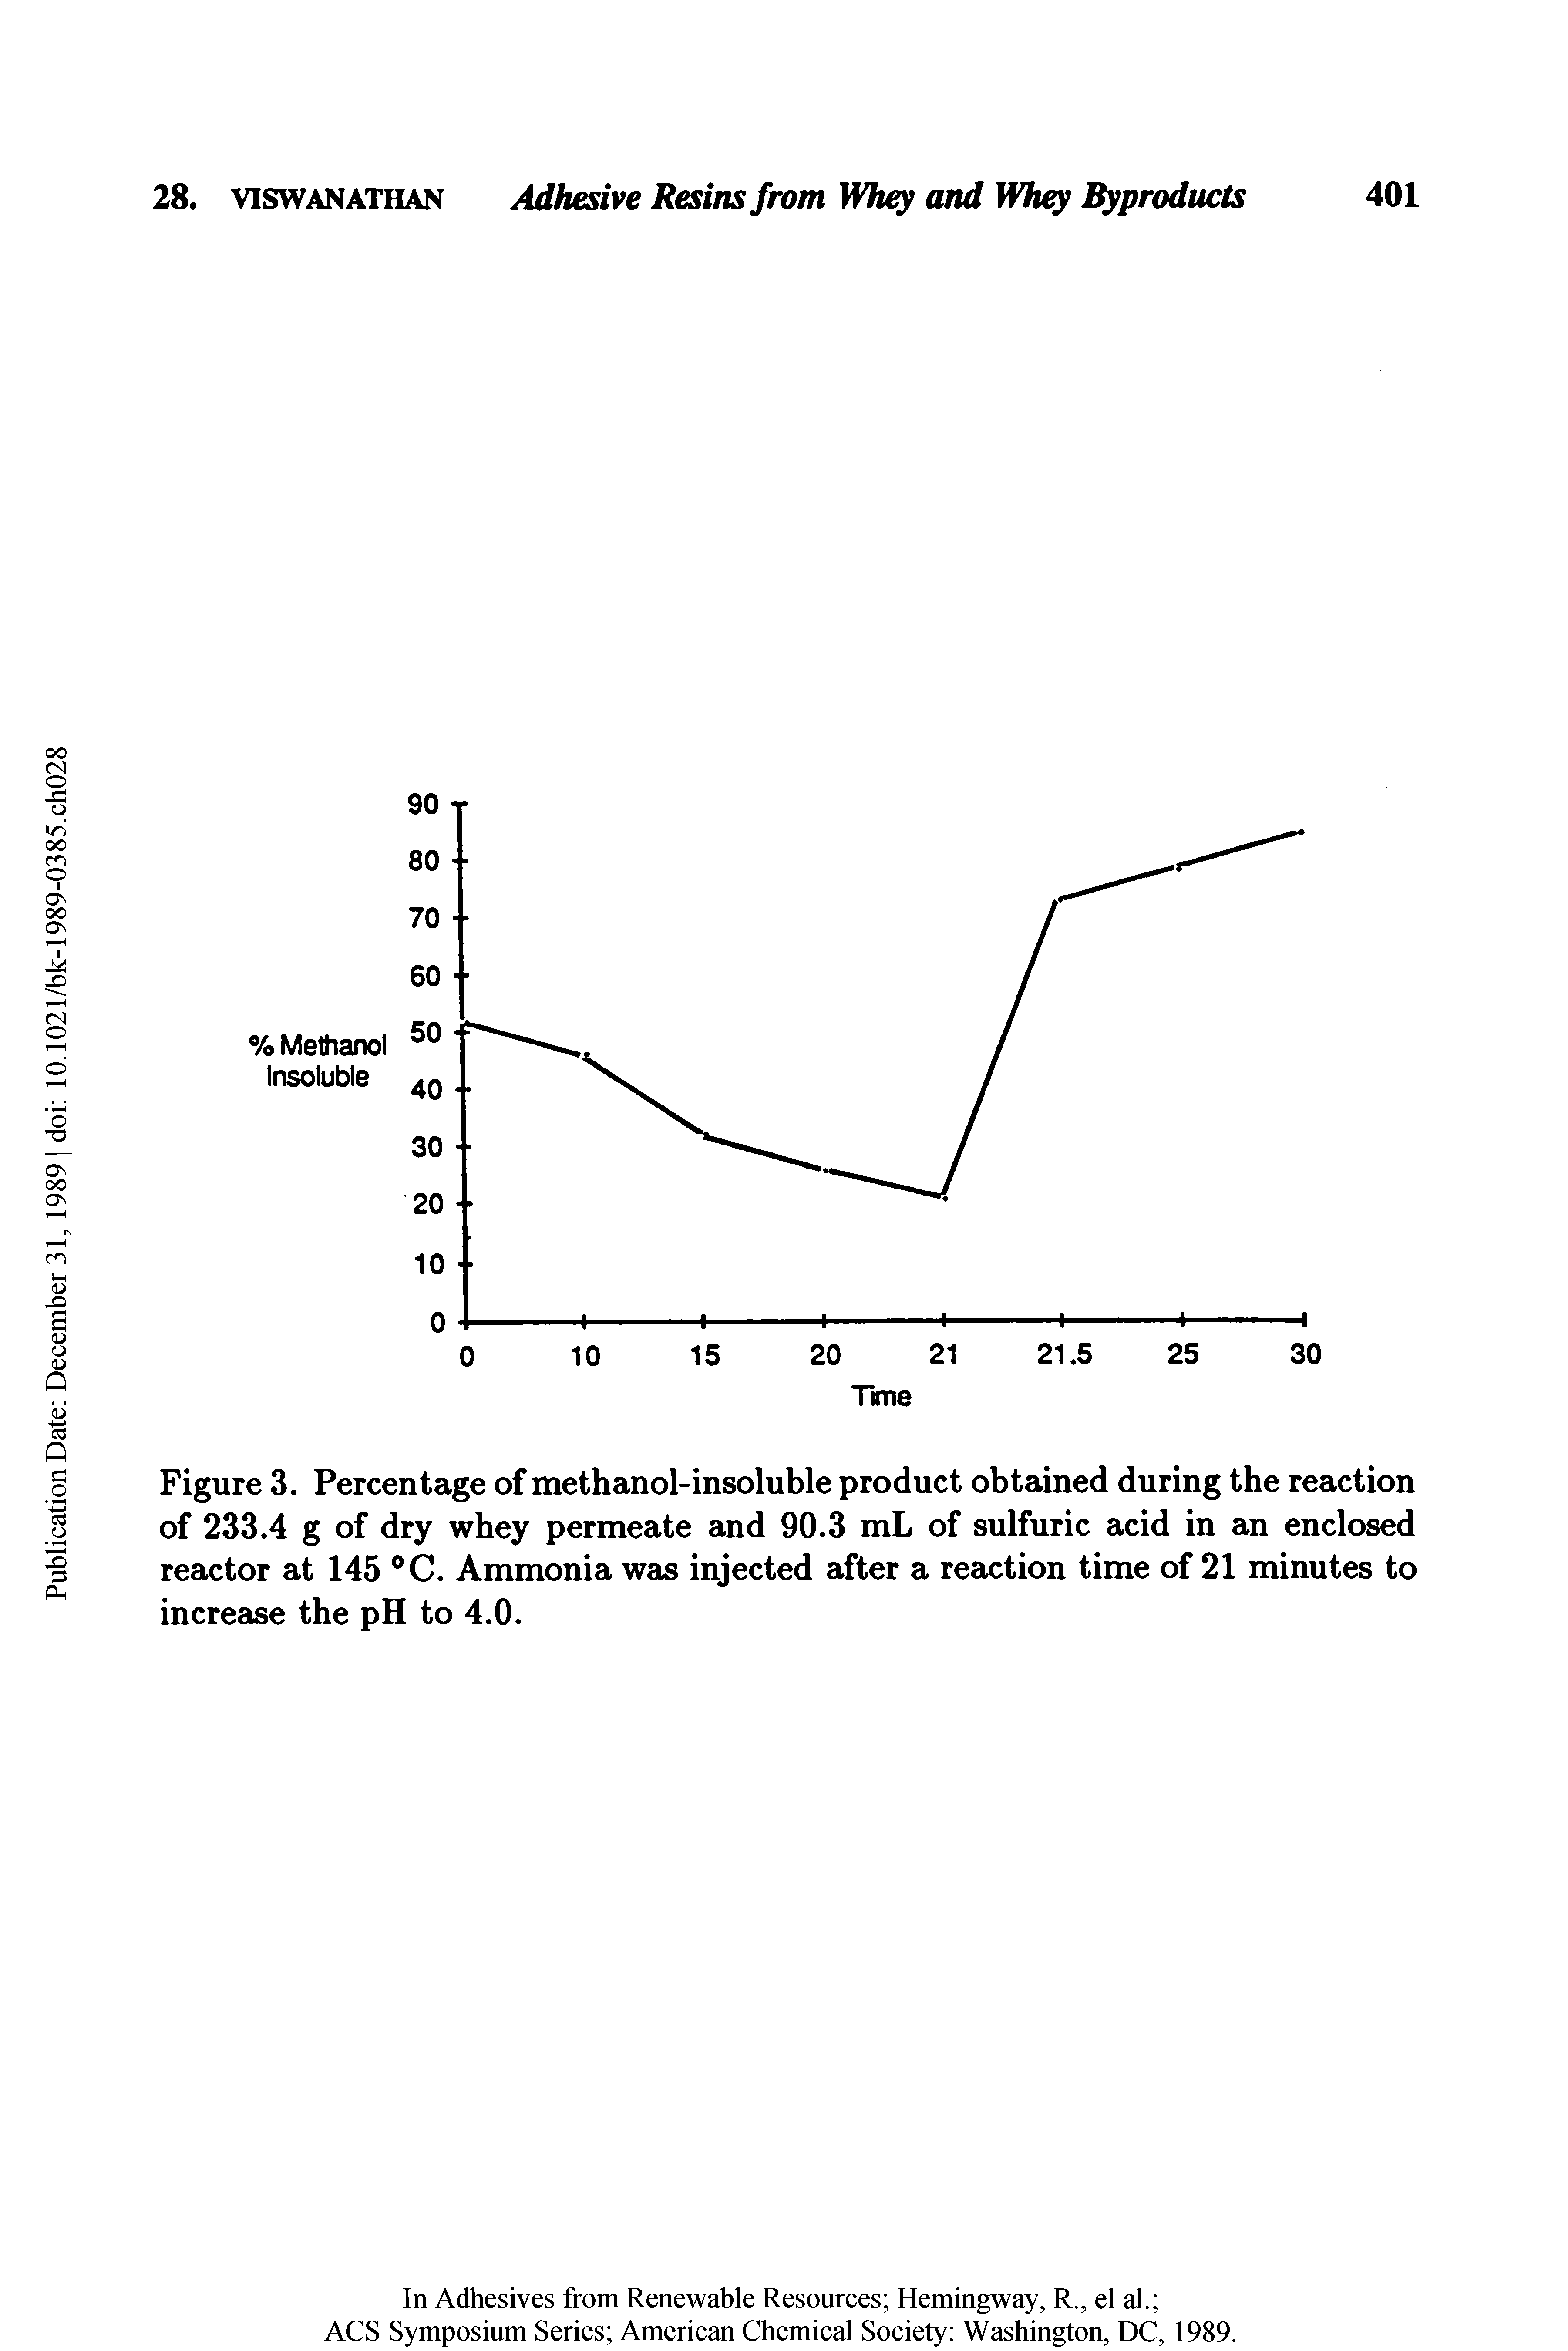 Figure 3. Percentage of methanol-insoluble product obtained during the reaction of 233.4 g of dry whey permeate and 90.3 mL of sulfuric acid in an enclosed reactor at 145 °C. Ammonia was injected after a reaction time of 21 minutes to increase the pH to 4.0.